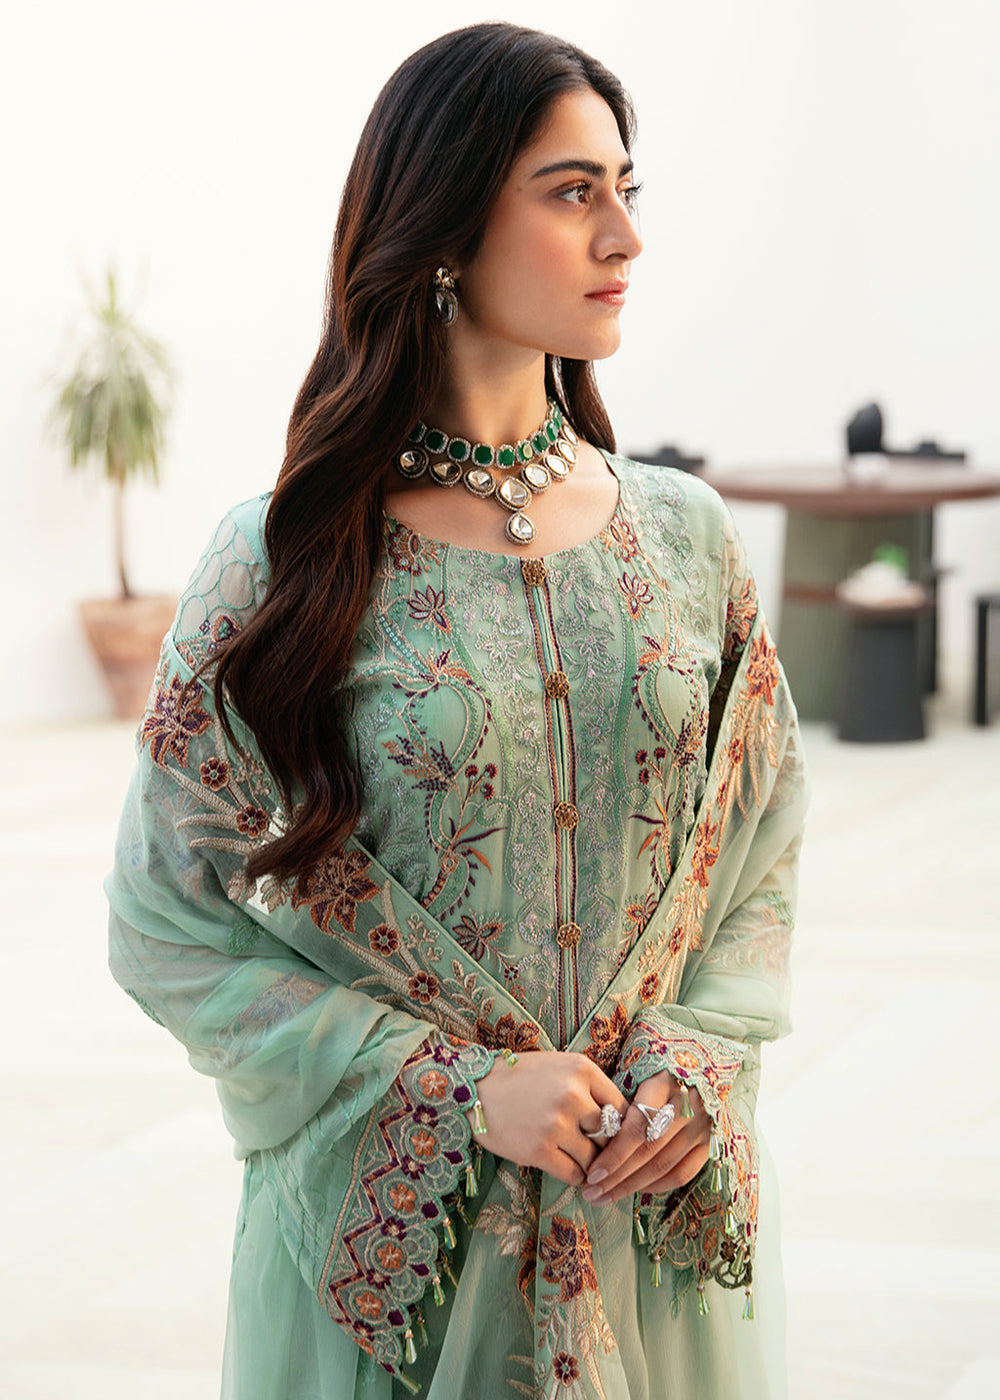 Buy Now Chevron Chiffon Collection Volume 8 by Ramsha | A-804 Online at Empress in USA, UK, Canada & Worldwide at Empress Clothing. 